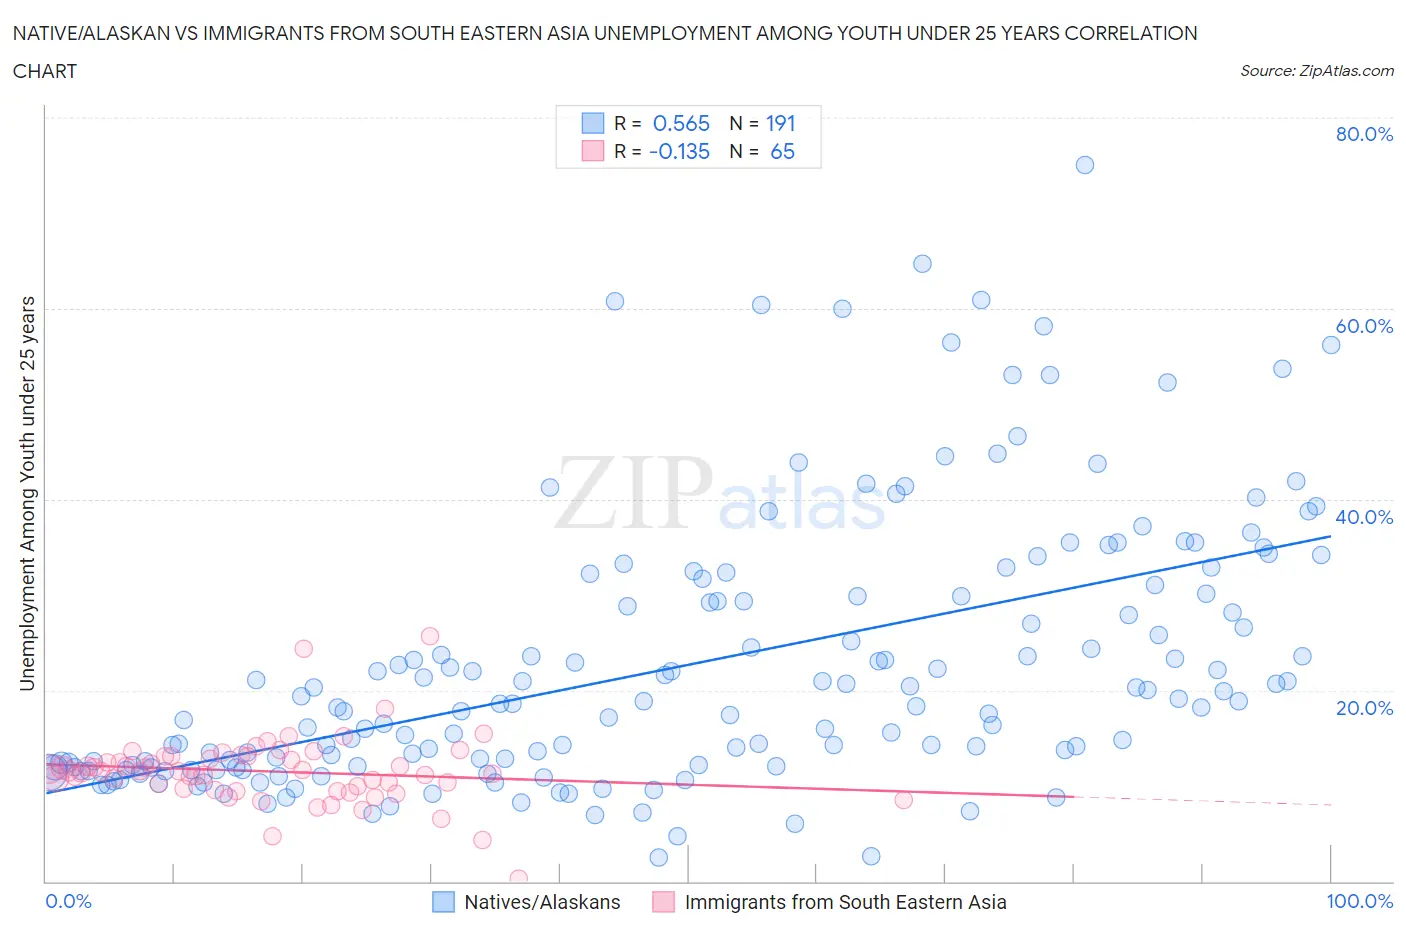 Native/Alaskan vs Immigrants from South Eastern Asia Unemployment Among Youth under 25 years